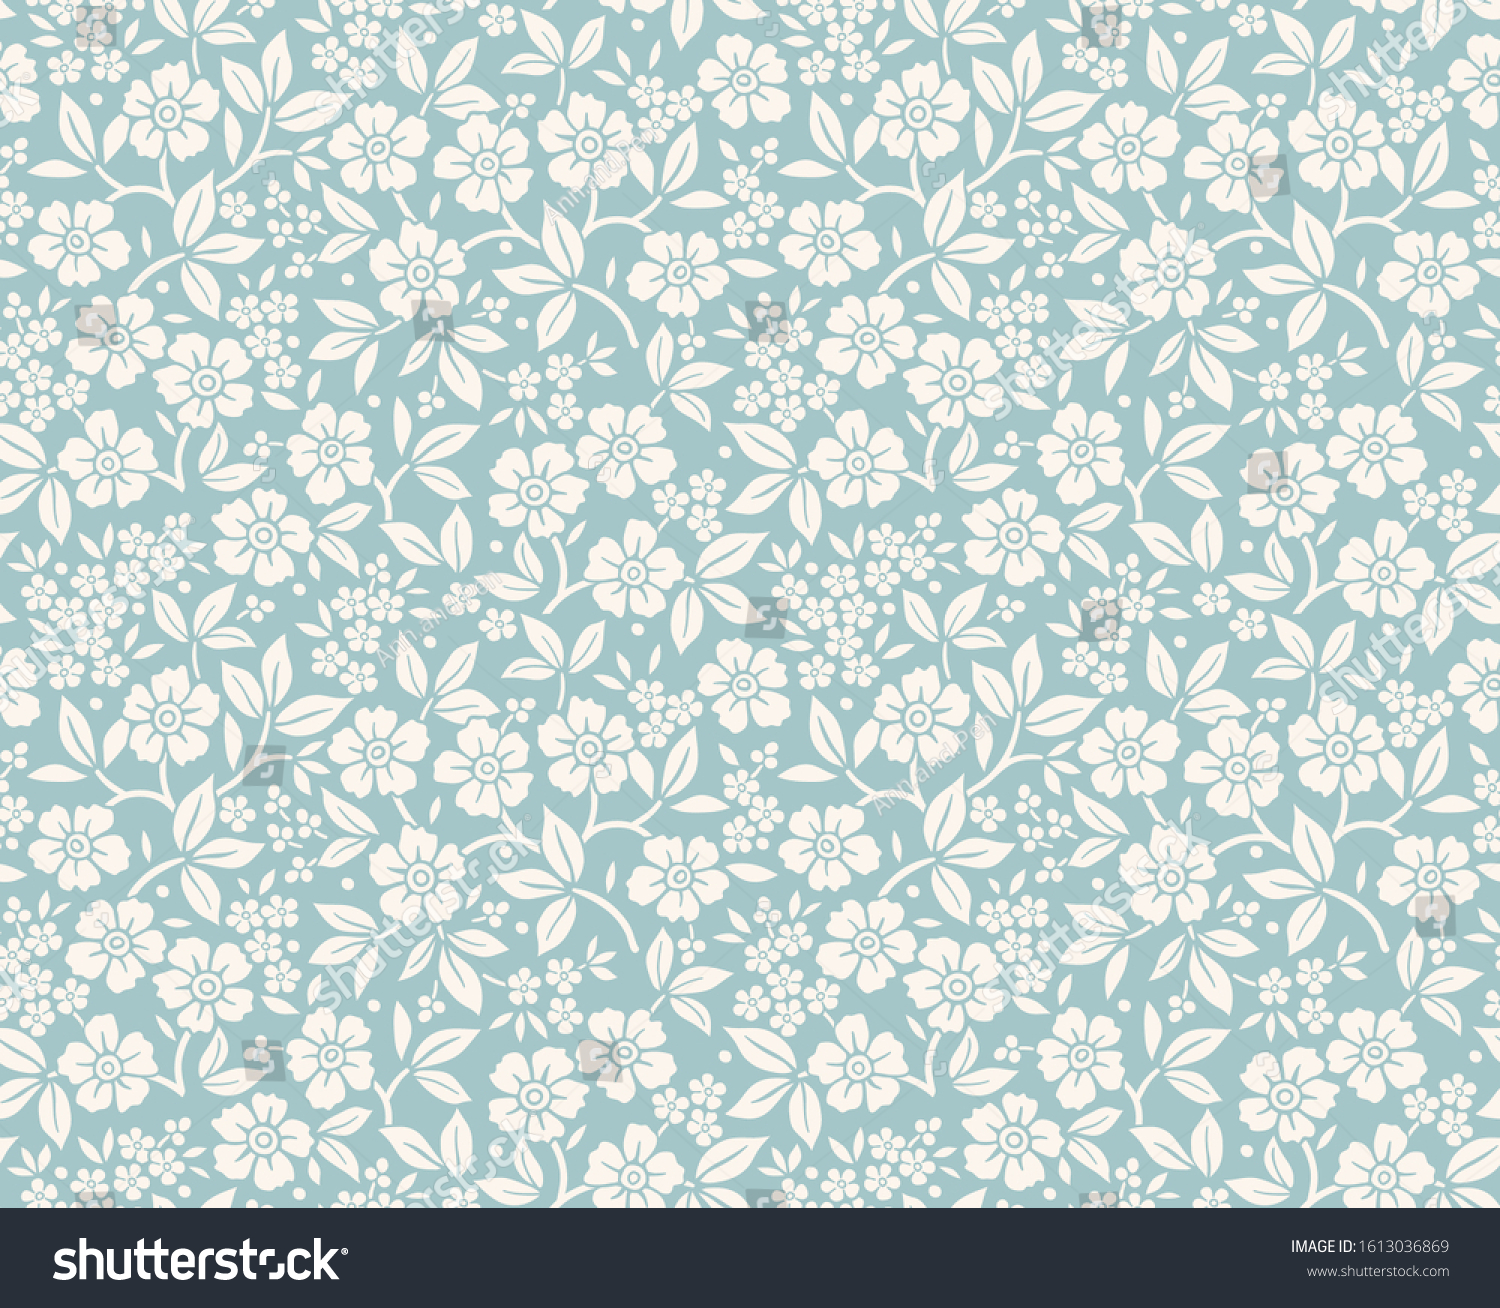 Floral pattern. Pretty flowers on gray blue background. Printing with small white flowers. Ditsy print. Seamless vector texture. Spring bouquet. #1613036869